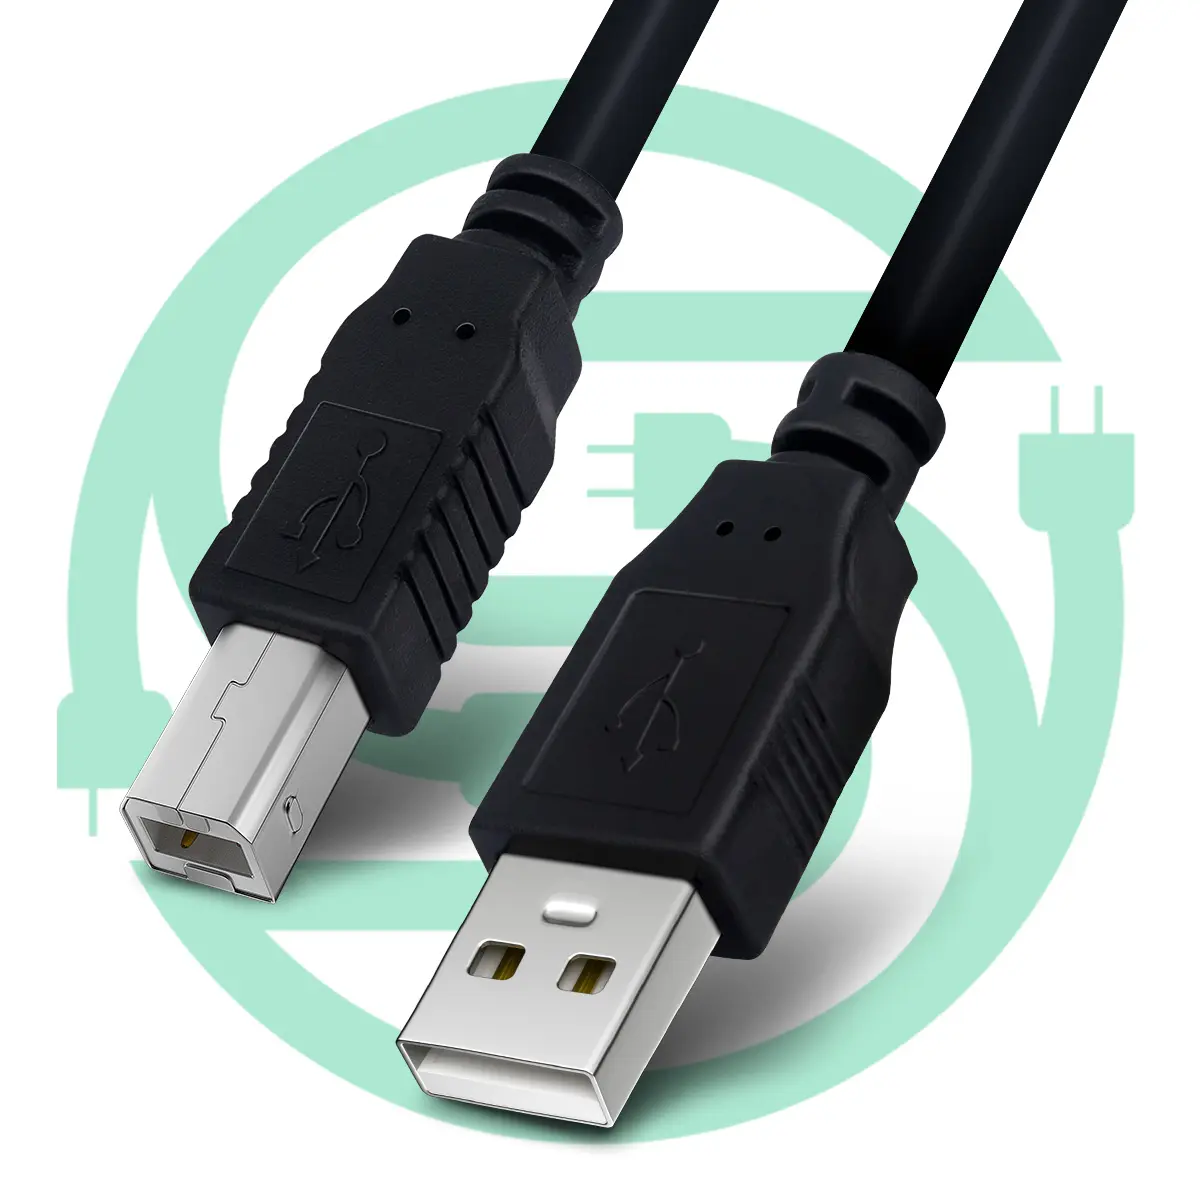 Factory direct USB Data Sync Printer Cable Lead 3m BLACK USB 2.0 AM to BM Cable for computer/printerHot sale products